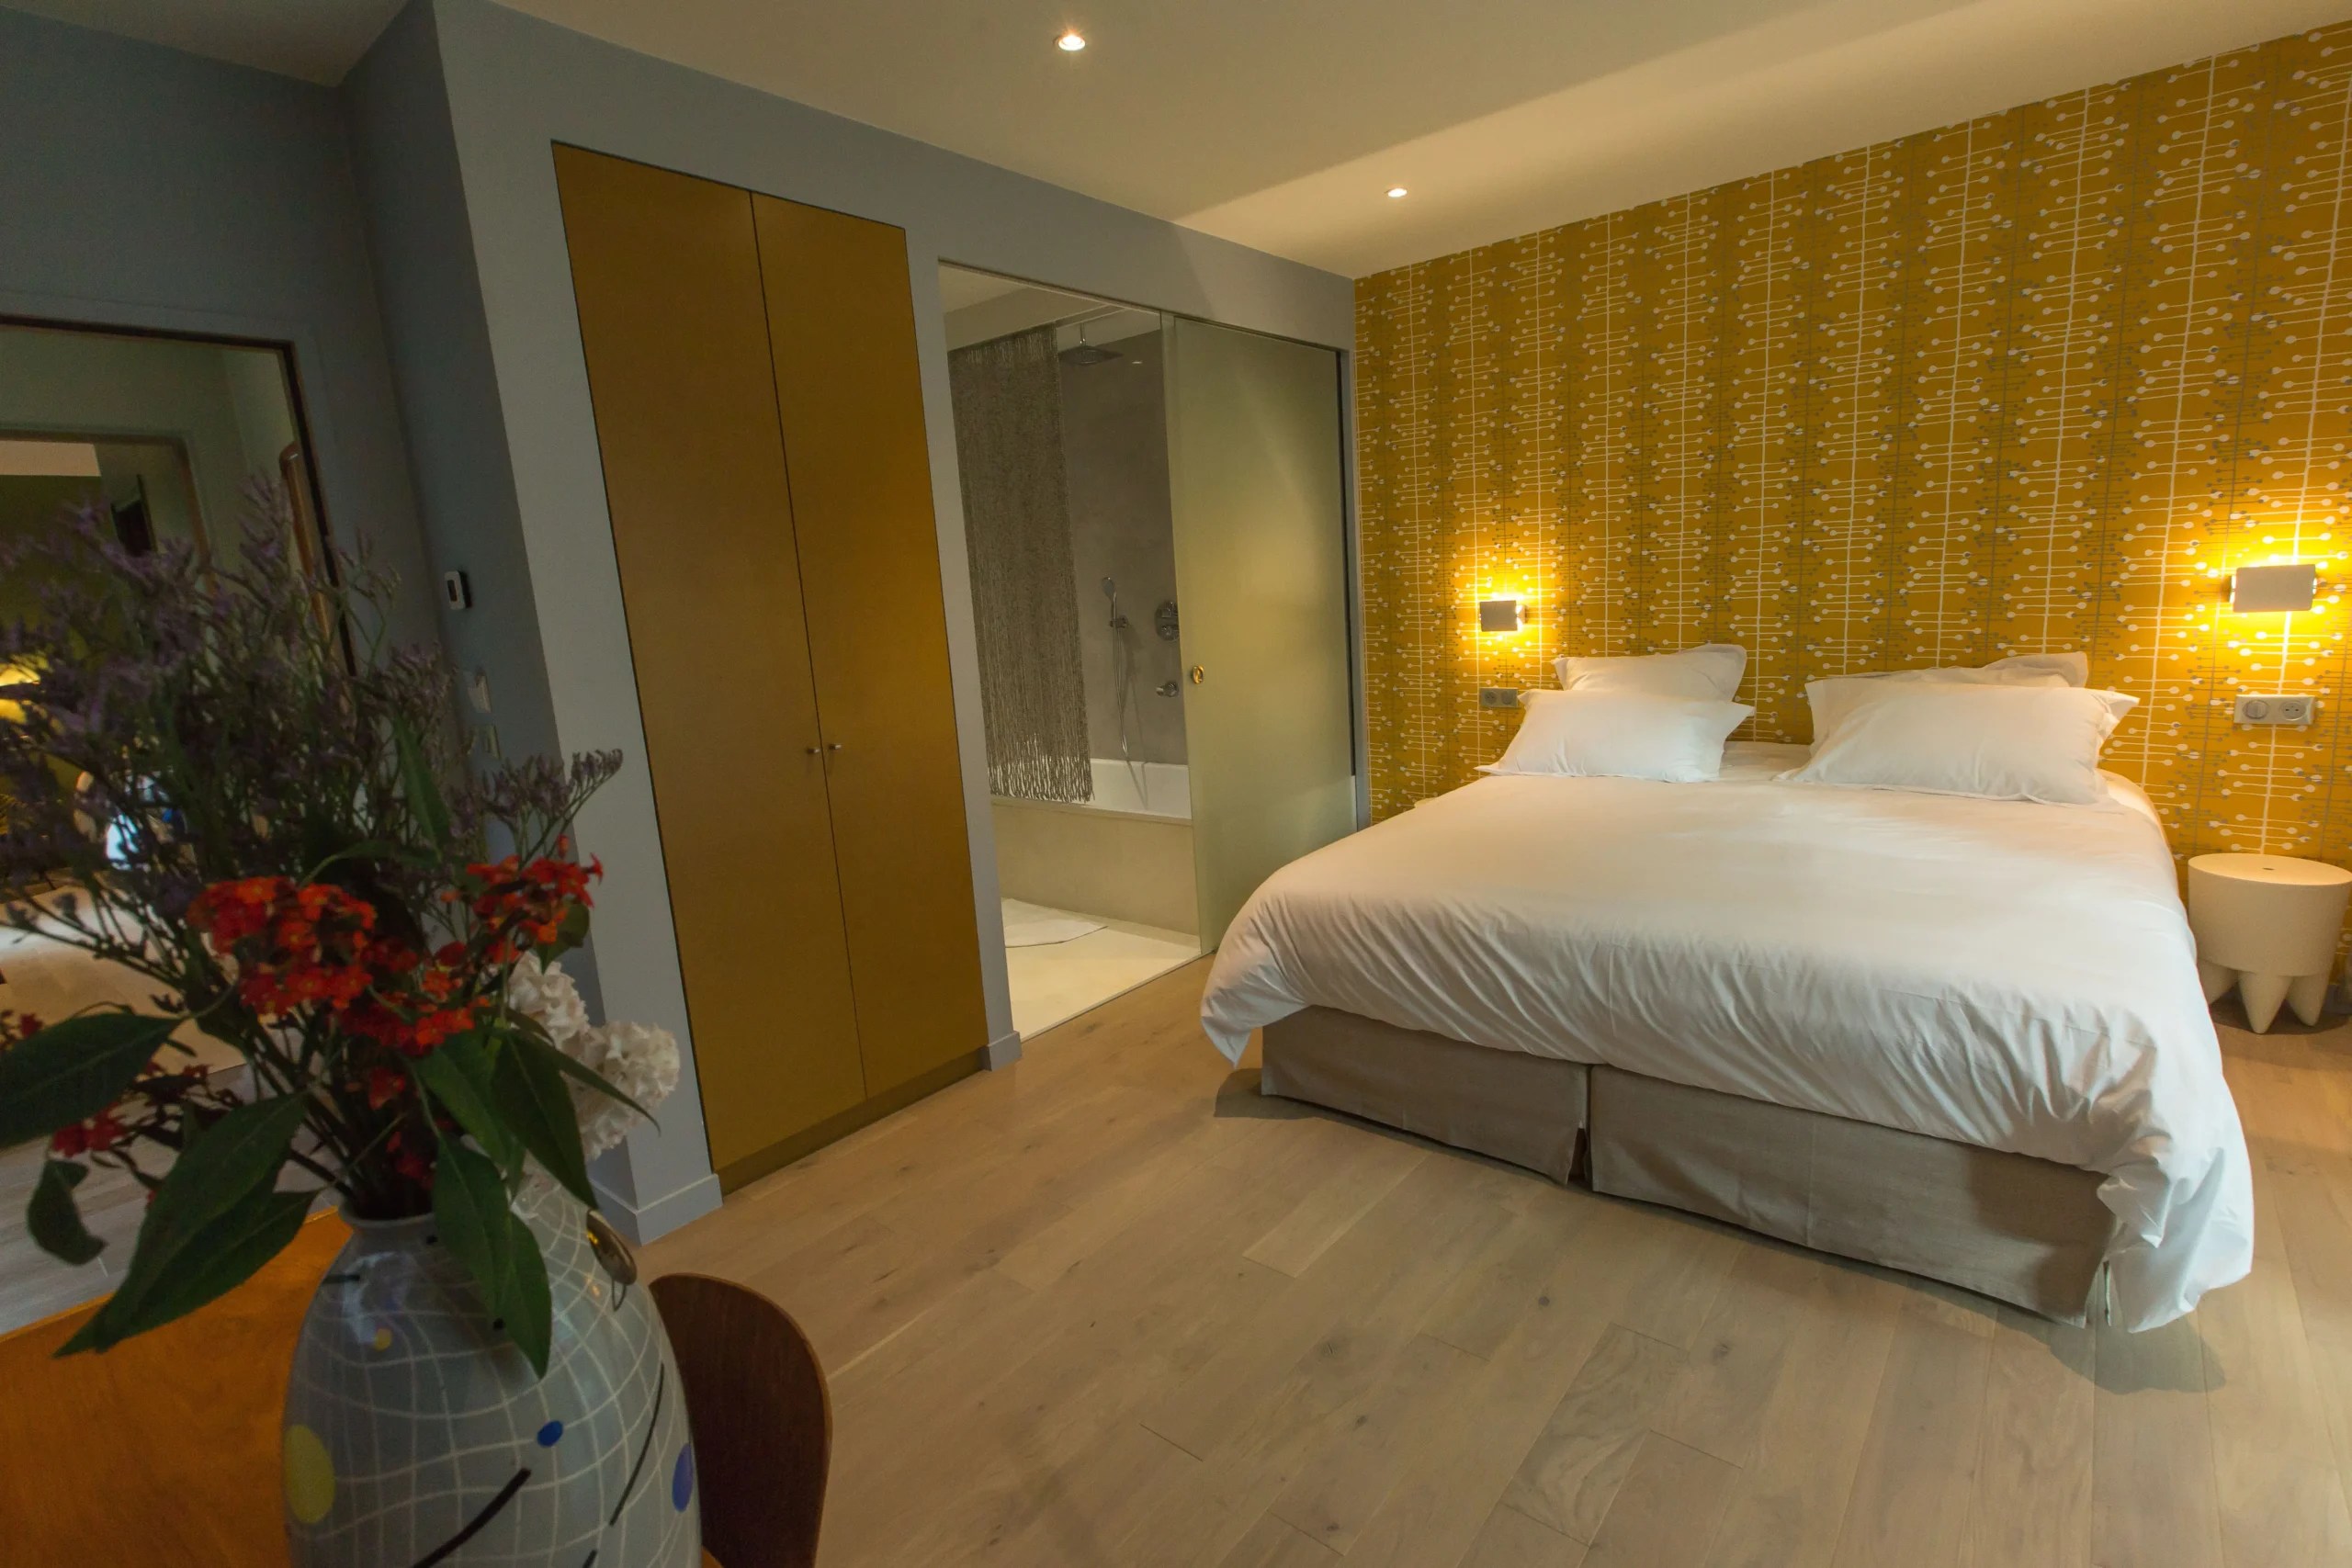 Warm and modern room at Eden Lodge Paris, an eco-friendly hotel, with a cozy bed, yellow patterned wallpaper, and natural wood elements paired with a fresh bouquet.